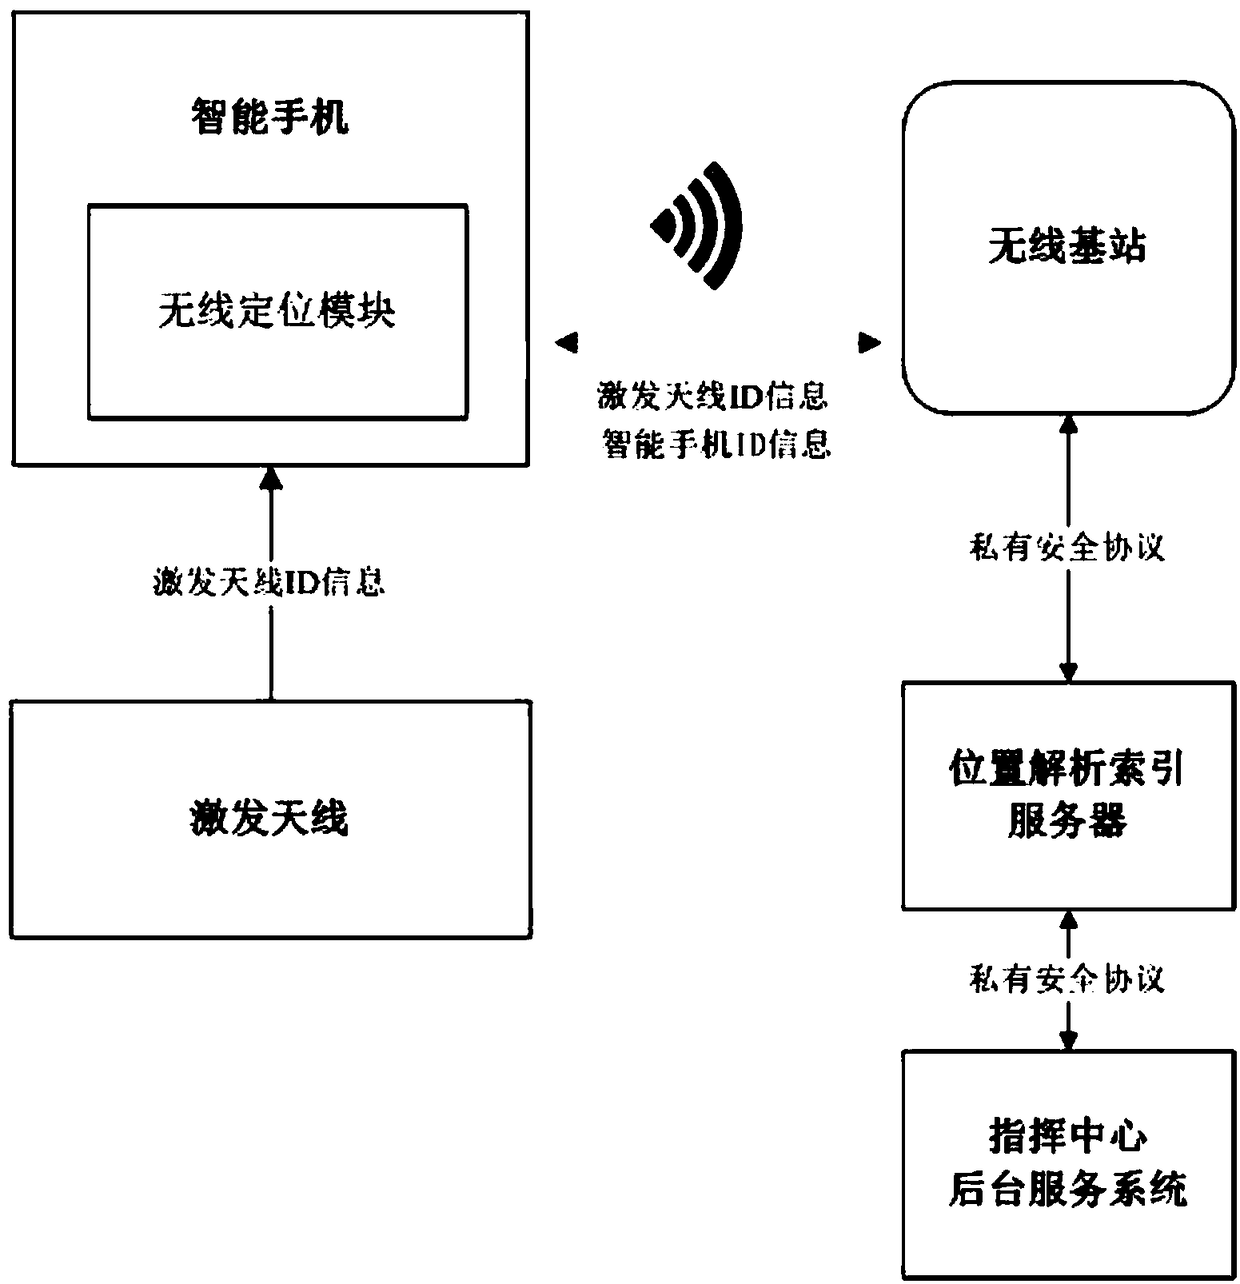 Regional wireless positioning system based on smart phone and method thereof